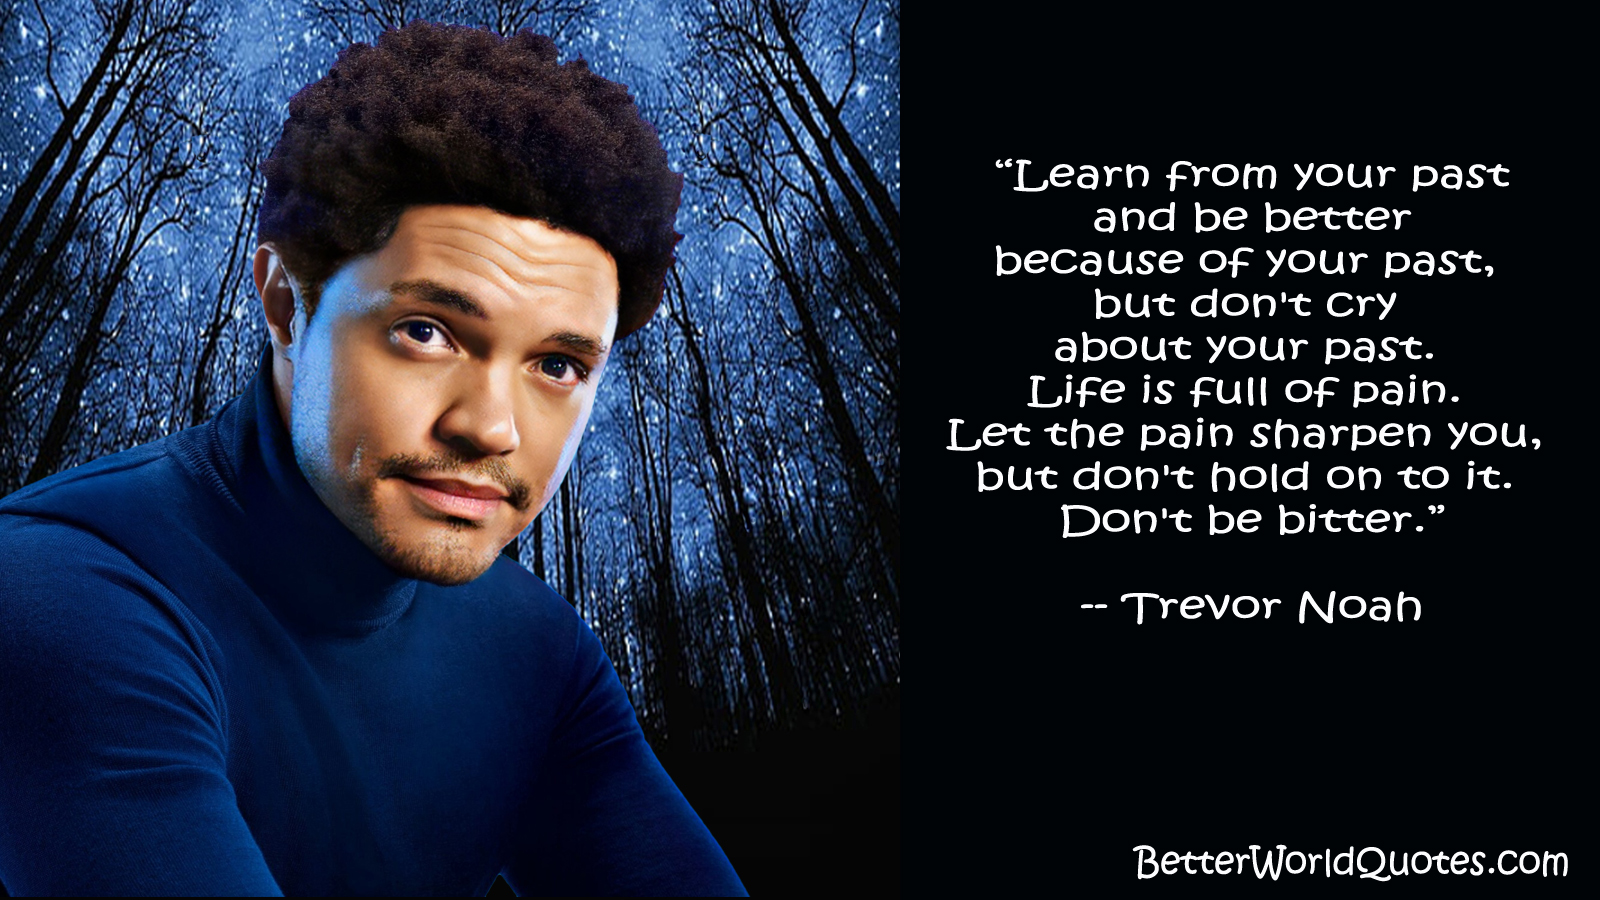 Trevor Noah: Learn from your past and be better because of your past, but don't cry about your past. Life is full of pain. Let the pain sharpen you, but don't hold on to it. Don't be bitter.